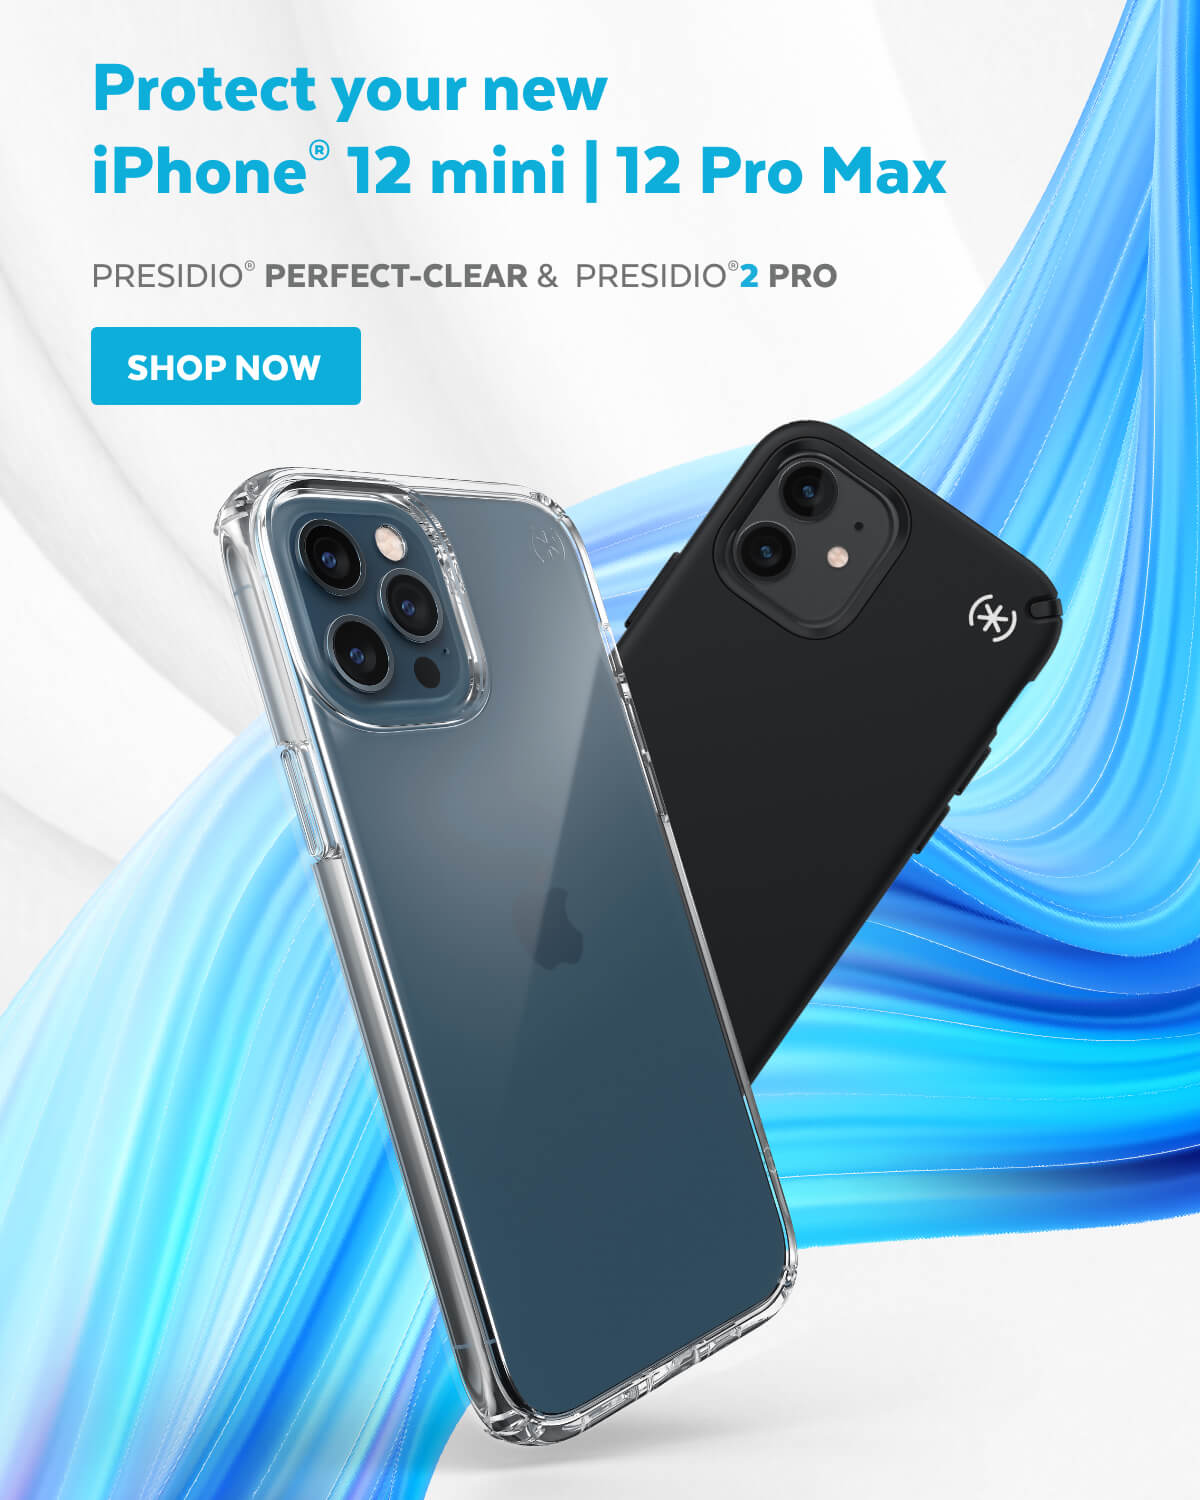 Protect your new iPhone 12 mini or 12 Pro Max. Presidio Perfect-Clear and Presidio 2 Pro. Shop now.